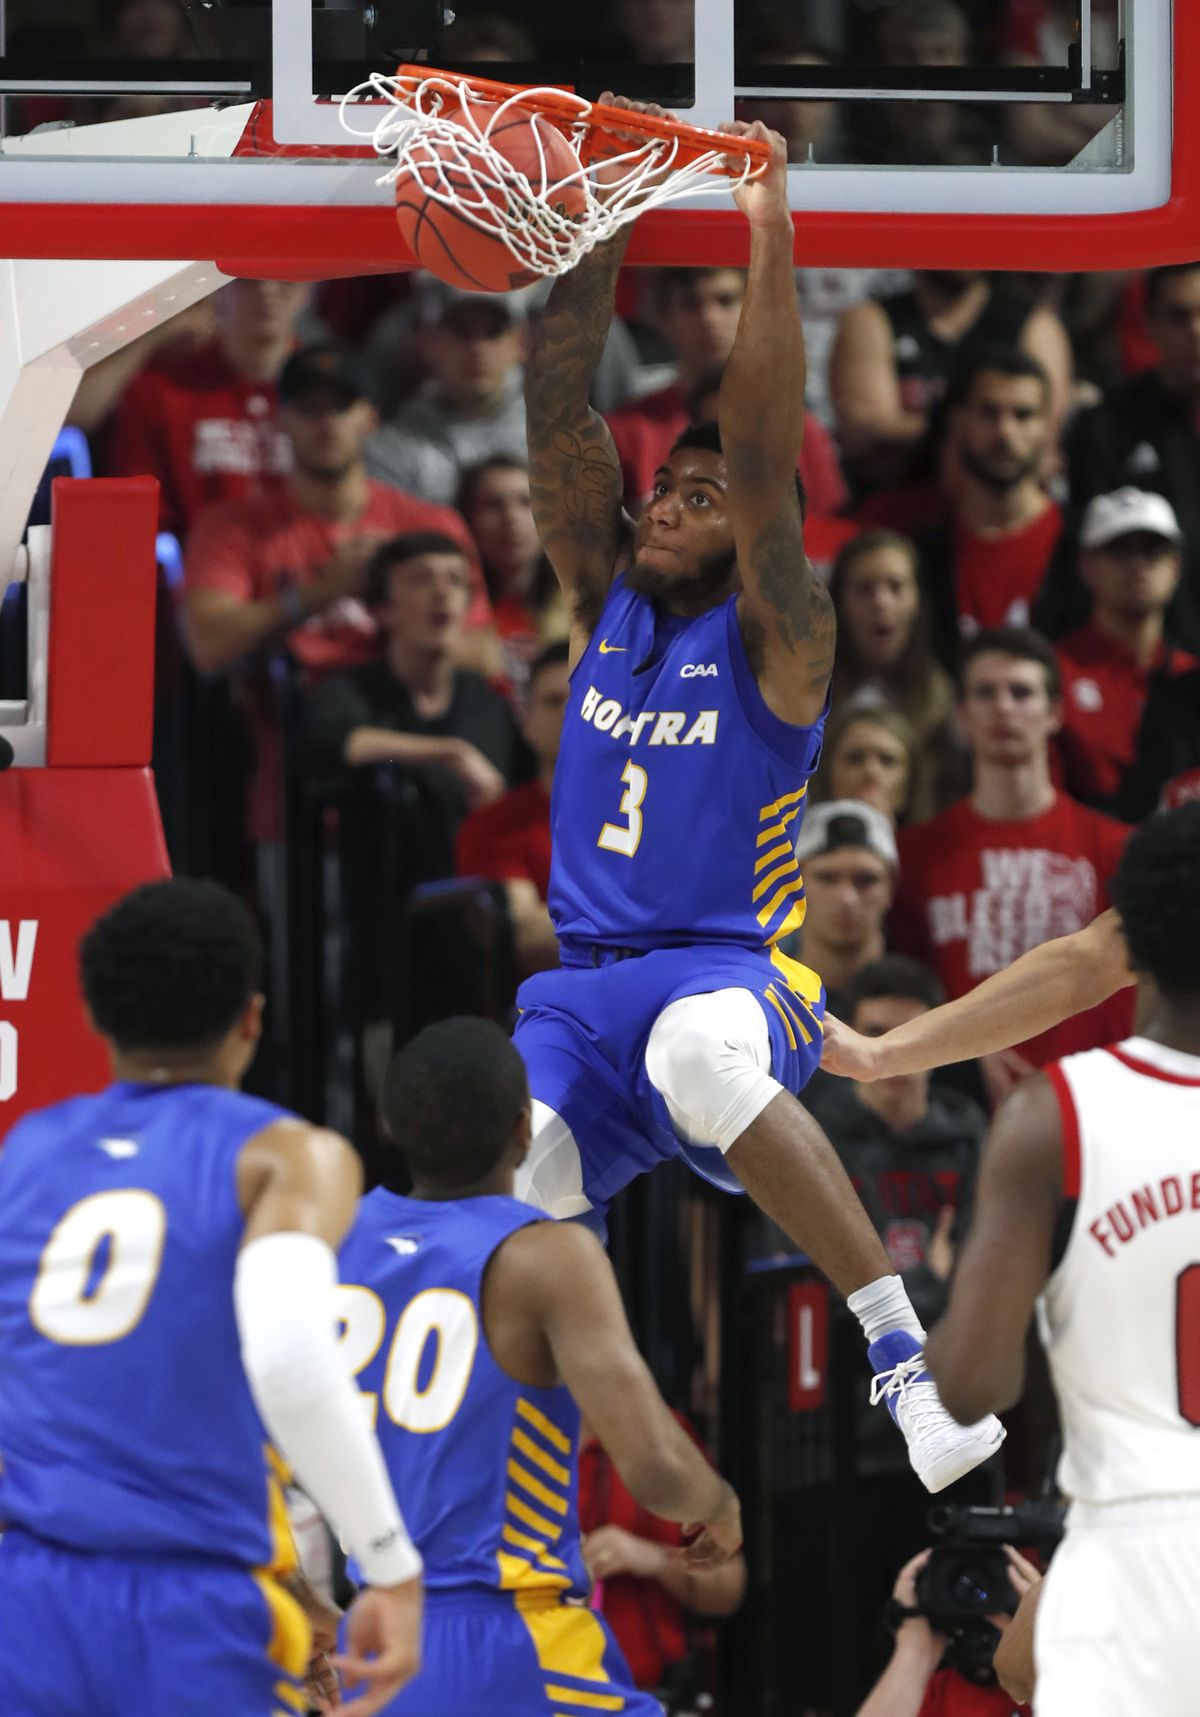 Hofstra's Justin Wright-Foreman (3) slams in two against North Carolina State during the first half of an NCAA college basketball game in Raleigh, N.C., Tuesday, March 19, 2019. (Ethan Hyman/The News & Observer via AP)